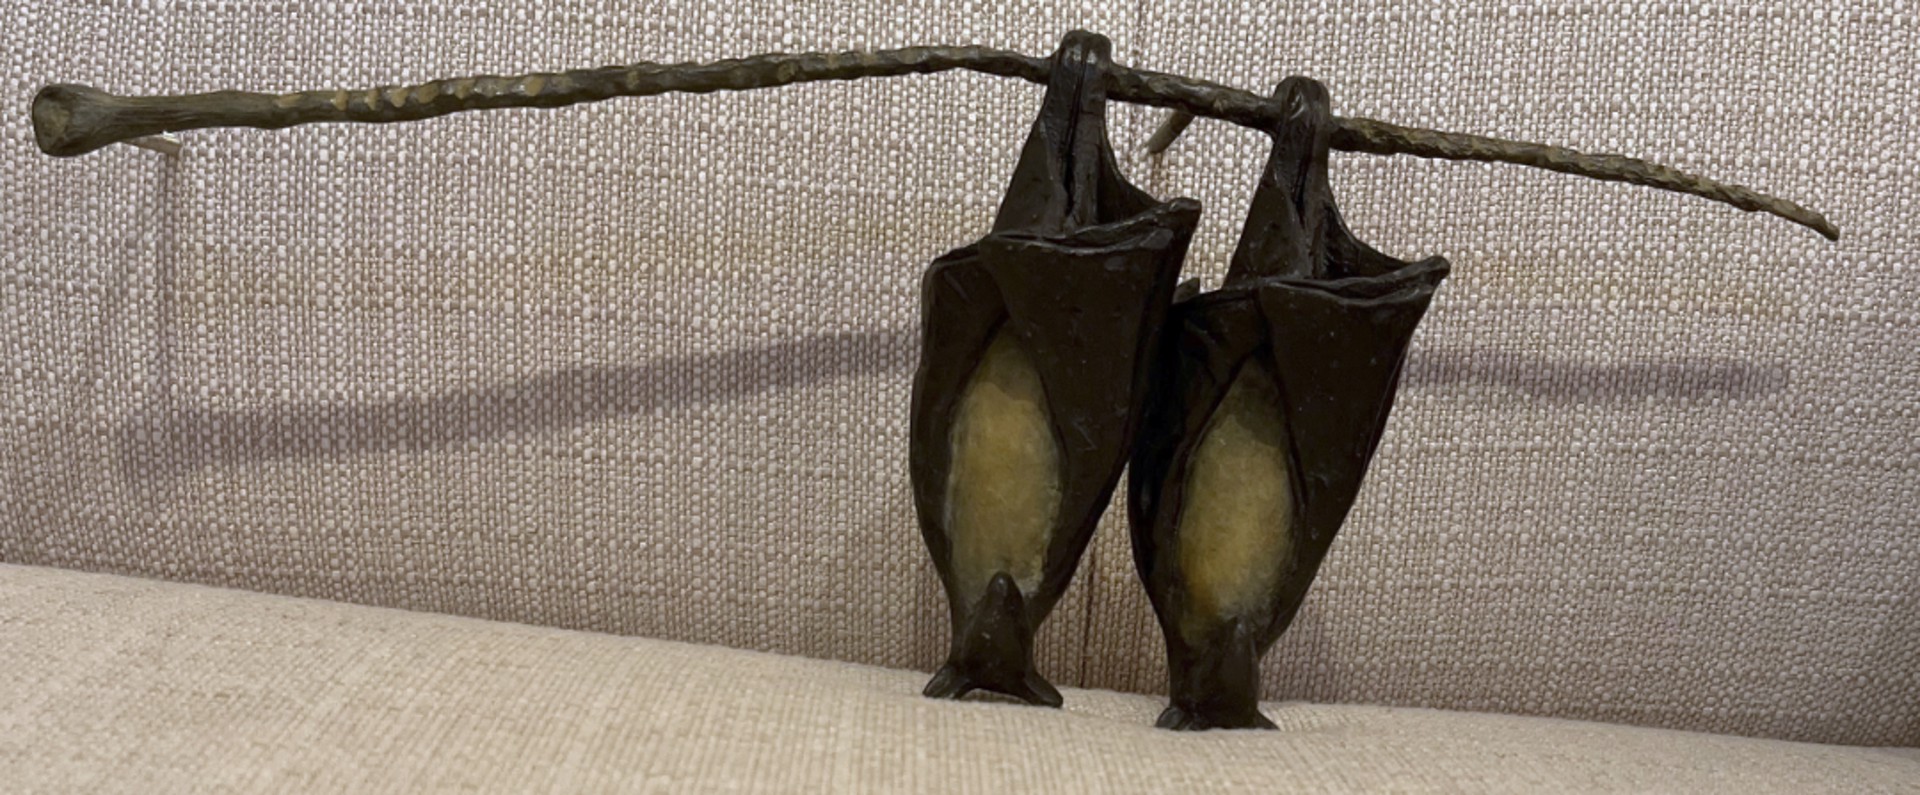 Pair of Temple Bats on a Branch, yellow bellies by Copper Tritscheller